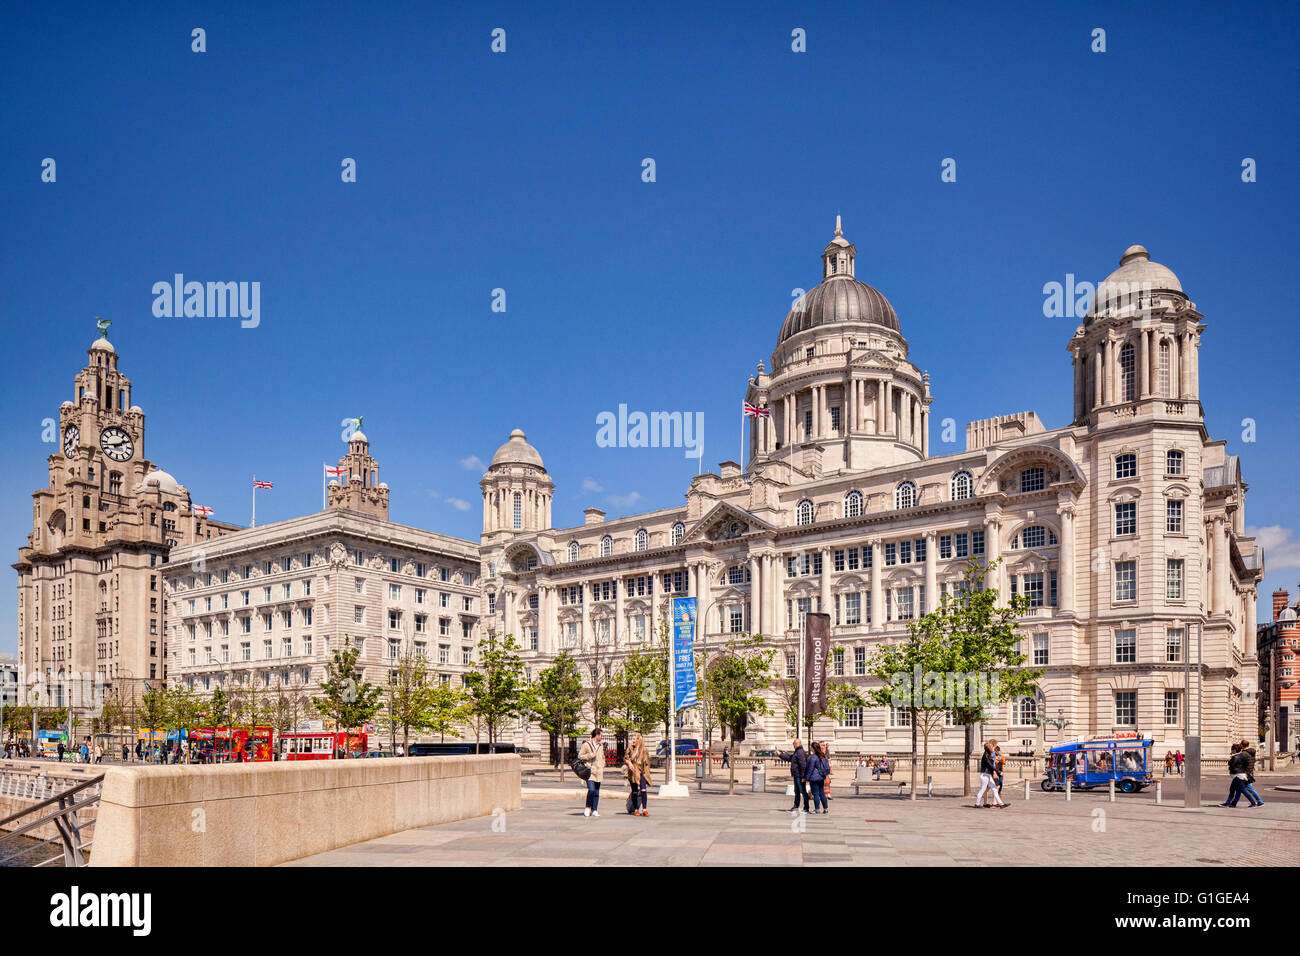 The 'Three Graces', historic buildings which dominate the Liverpool waterfront at Pier Head. They are the Royal Liver Building, Stock Photo